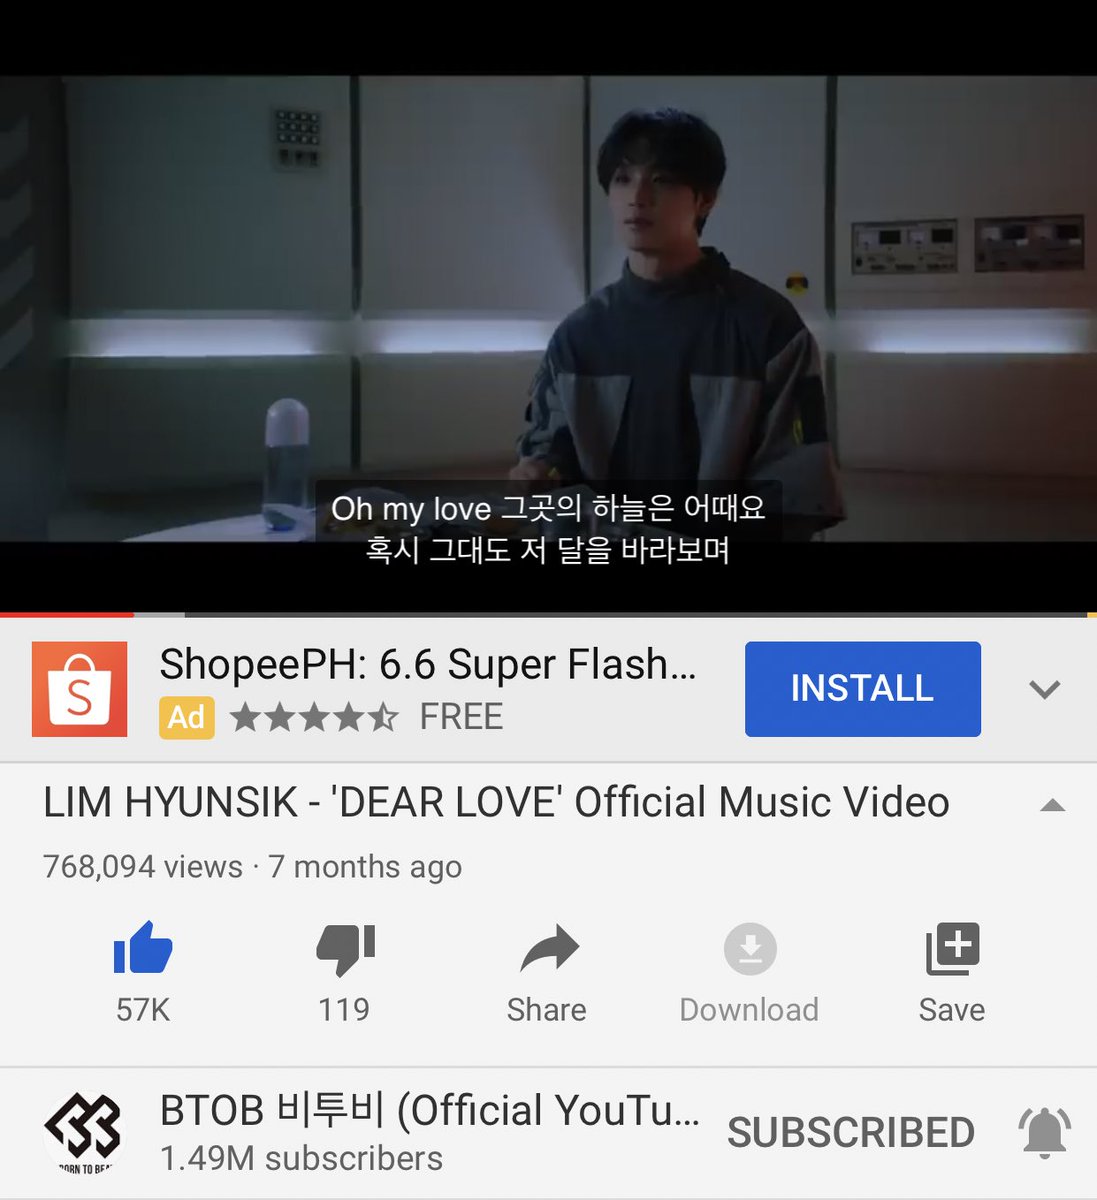 Dear Love view count streaming thread 22MAY2020 8:38AM KST768,094